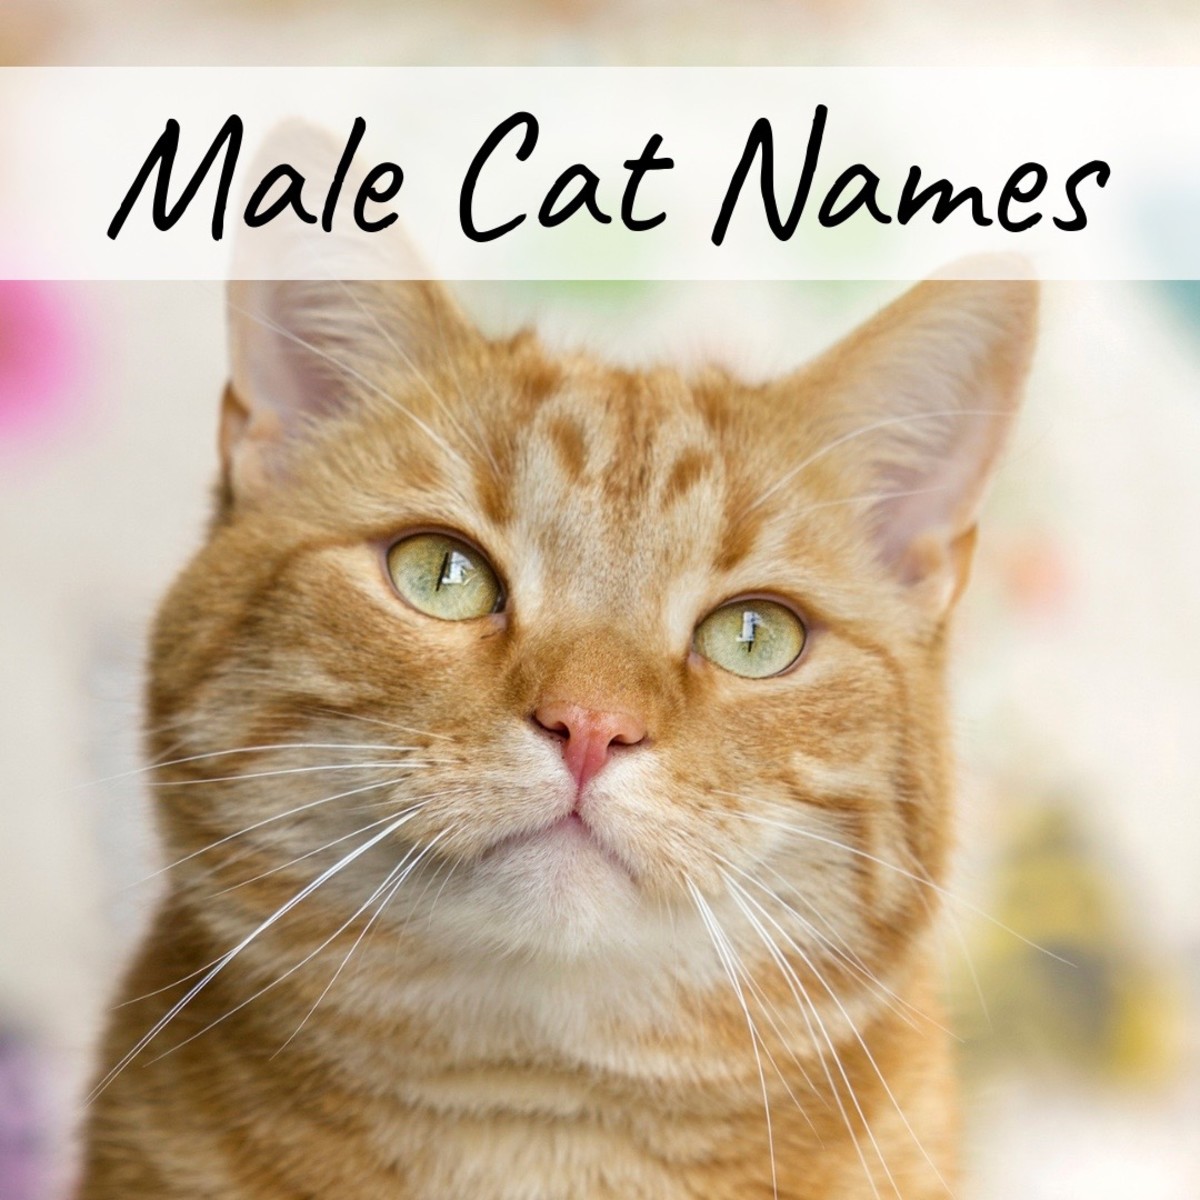 There are lots of great names for male kitties!